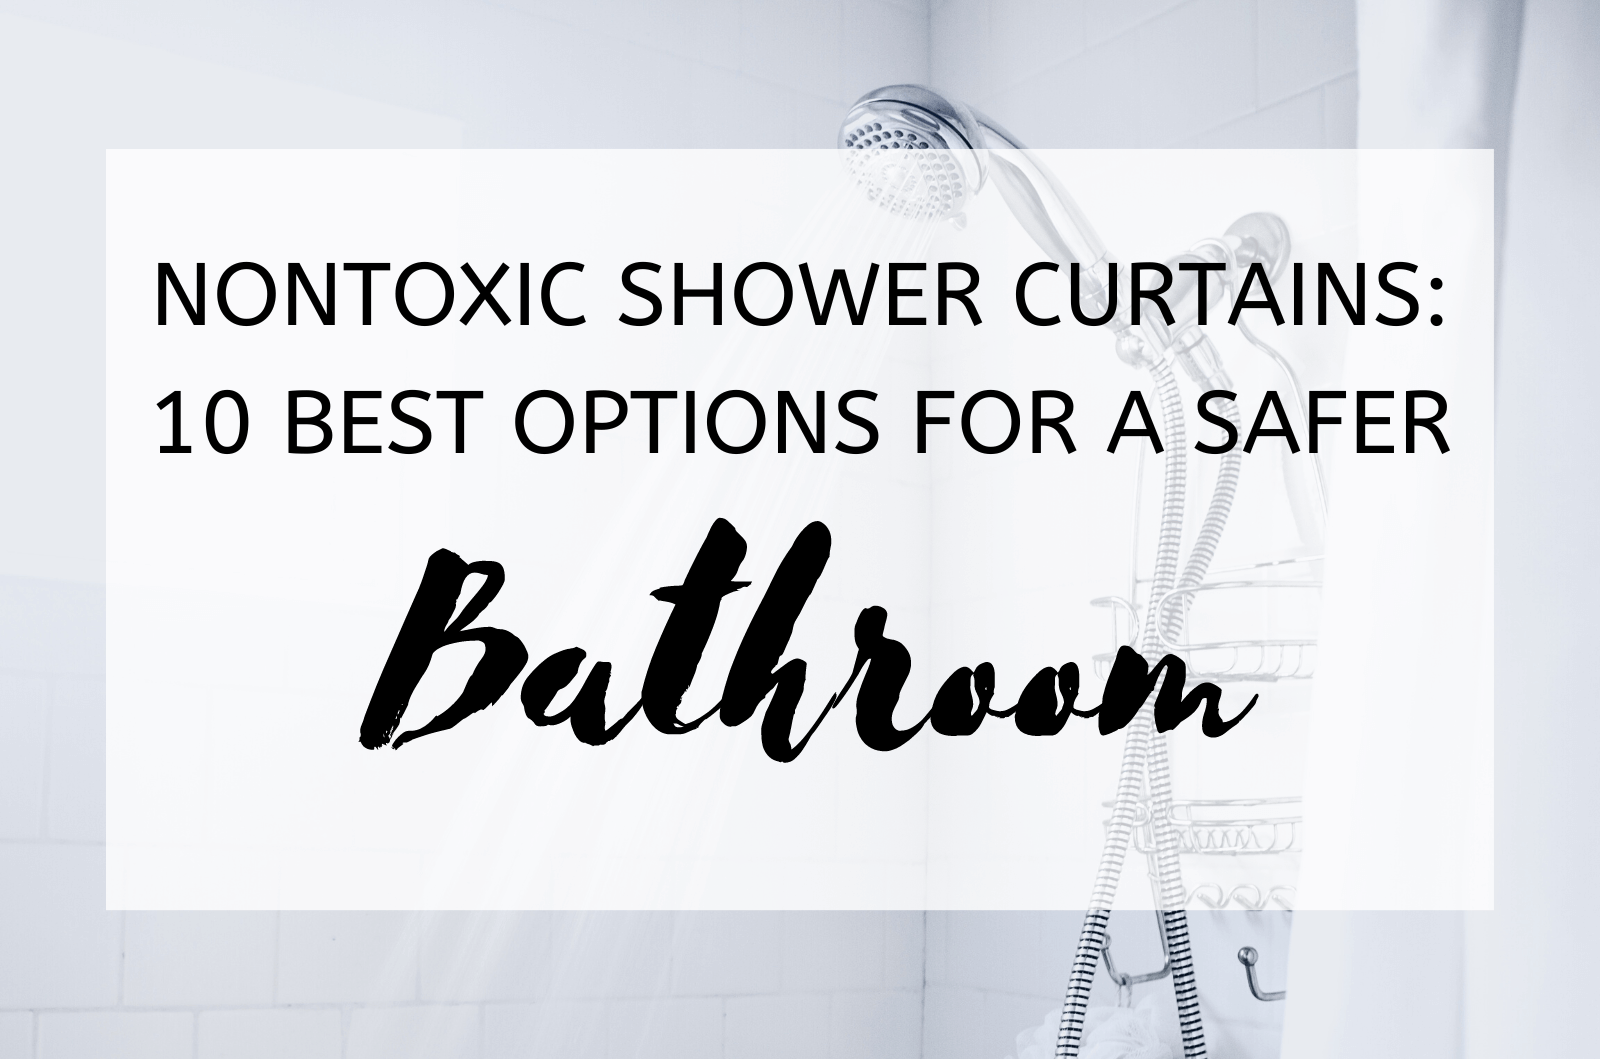 Nontoxic Shower Curtains: 10 Best Options For A Safer Bathroom